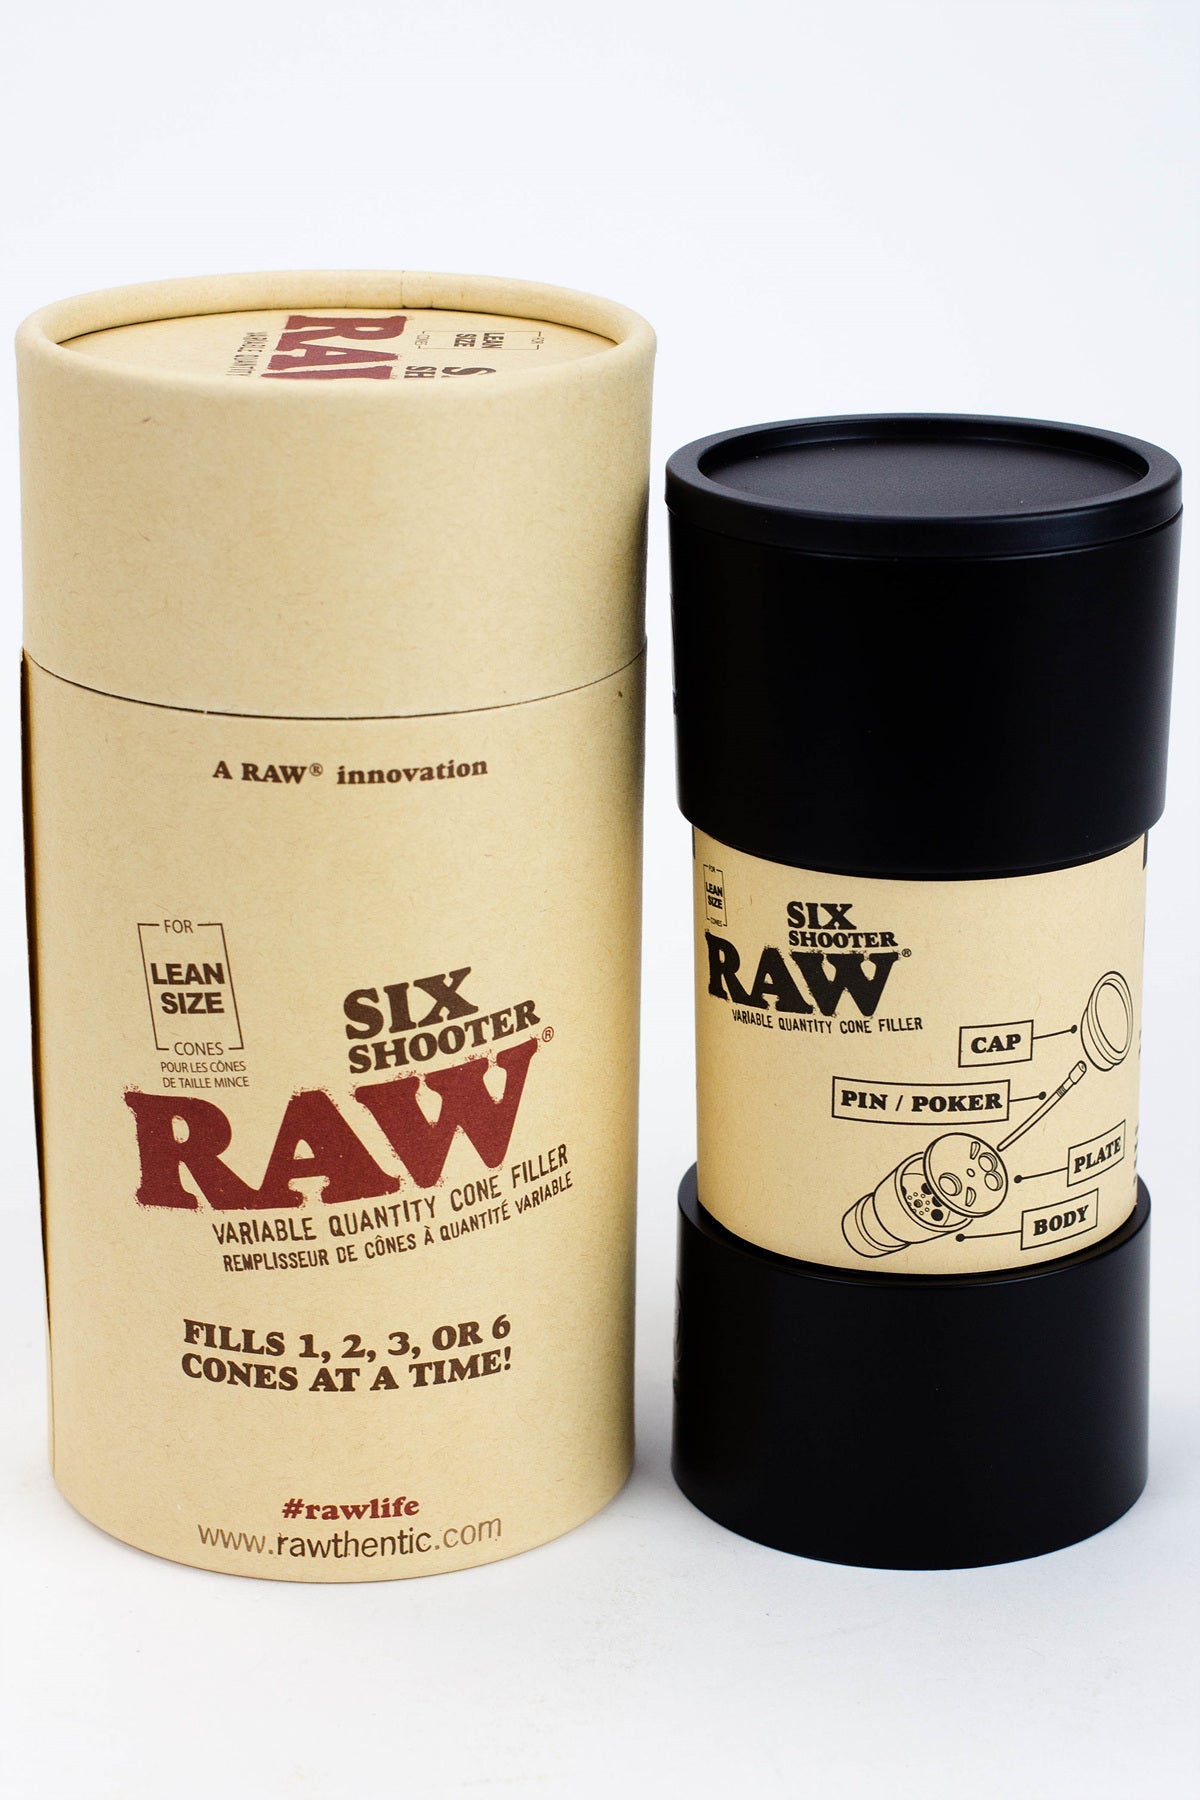 Raw six shooter for Lean size cones_0